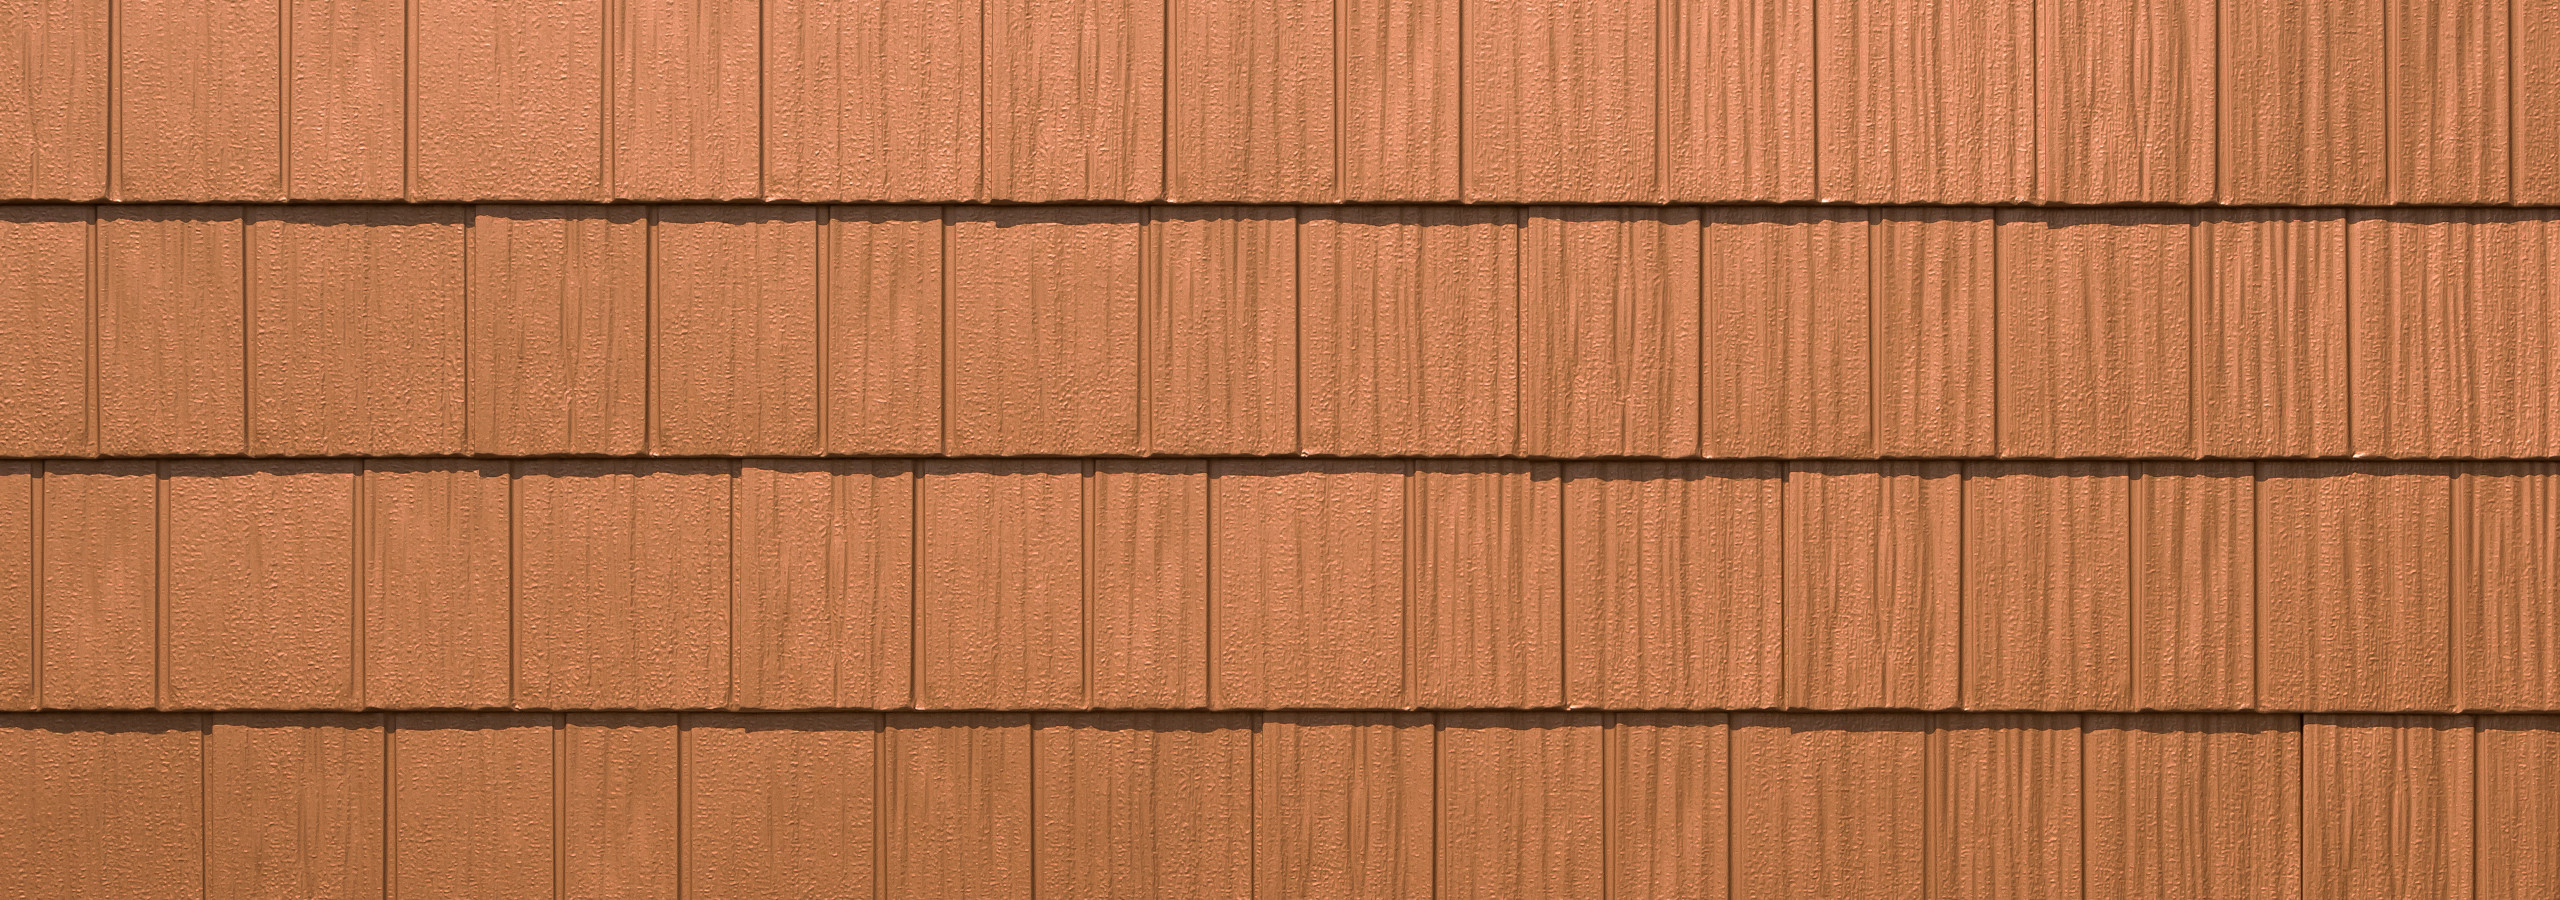 Copper steel shake roofing